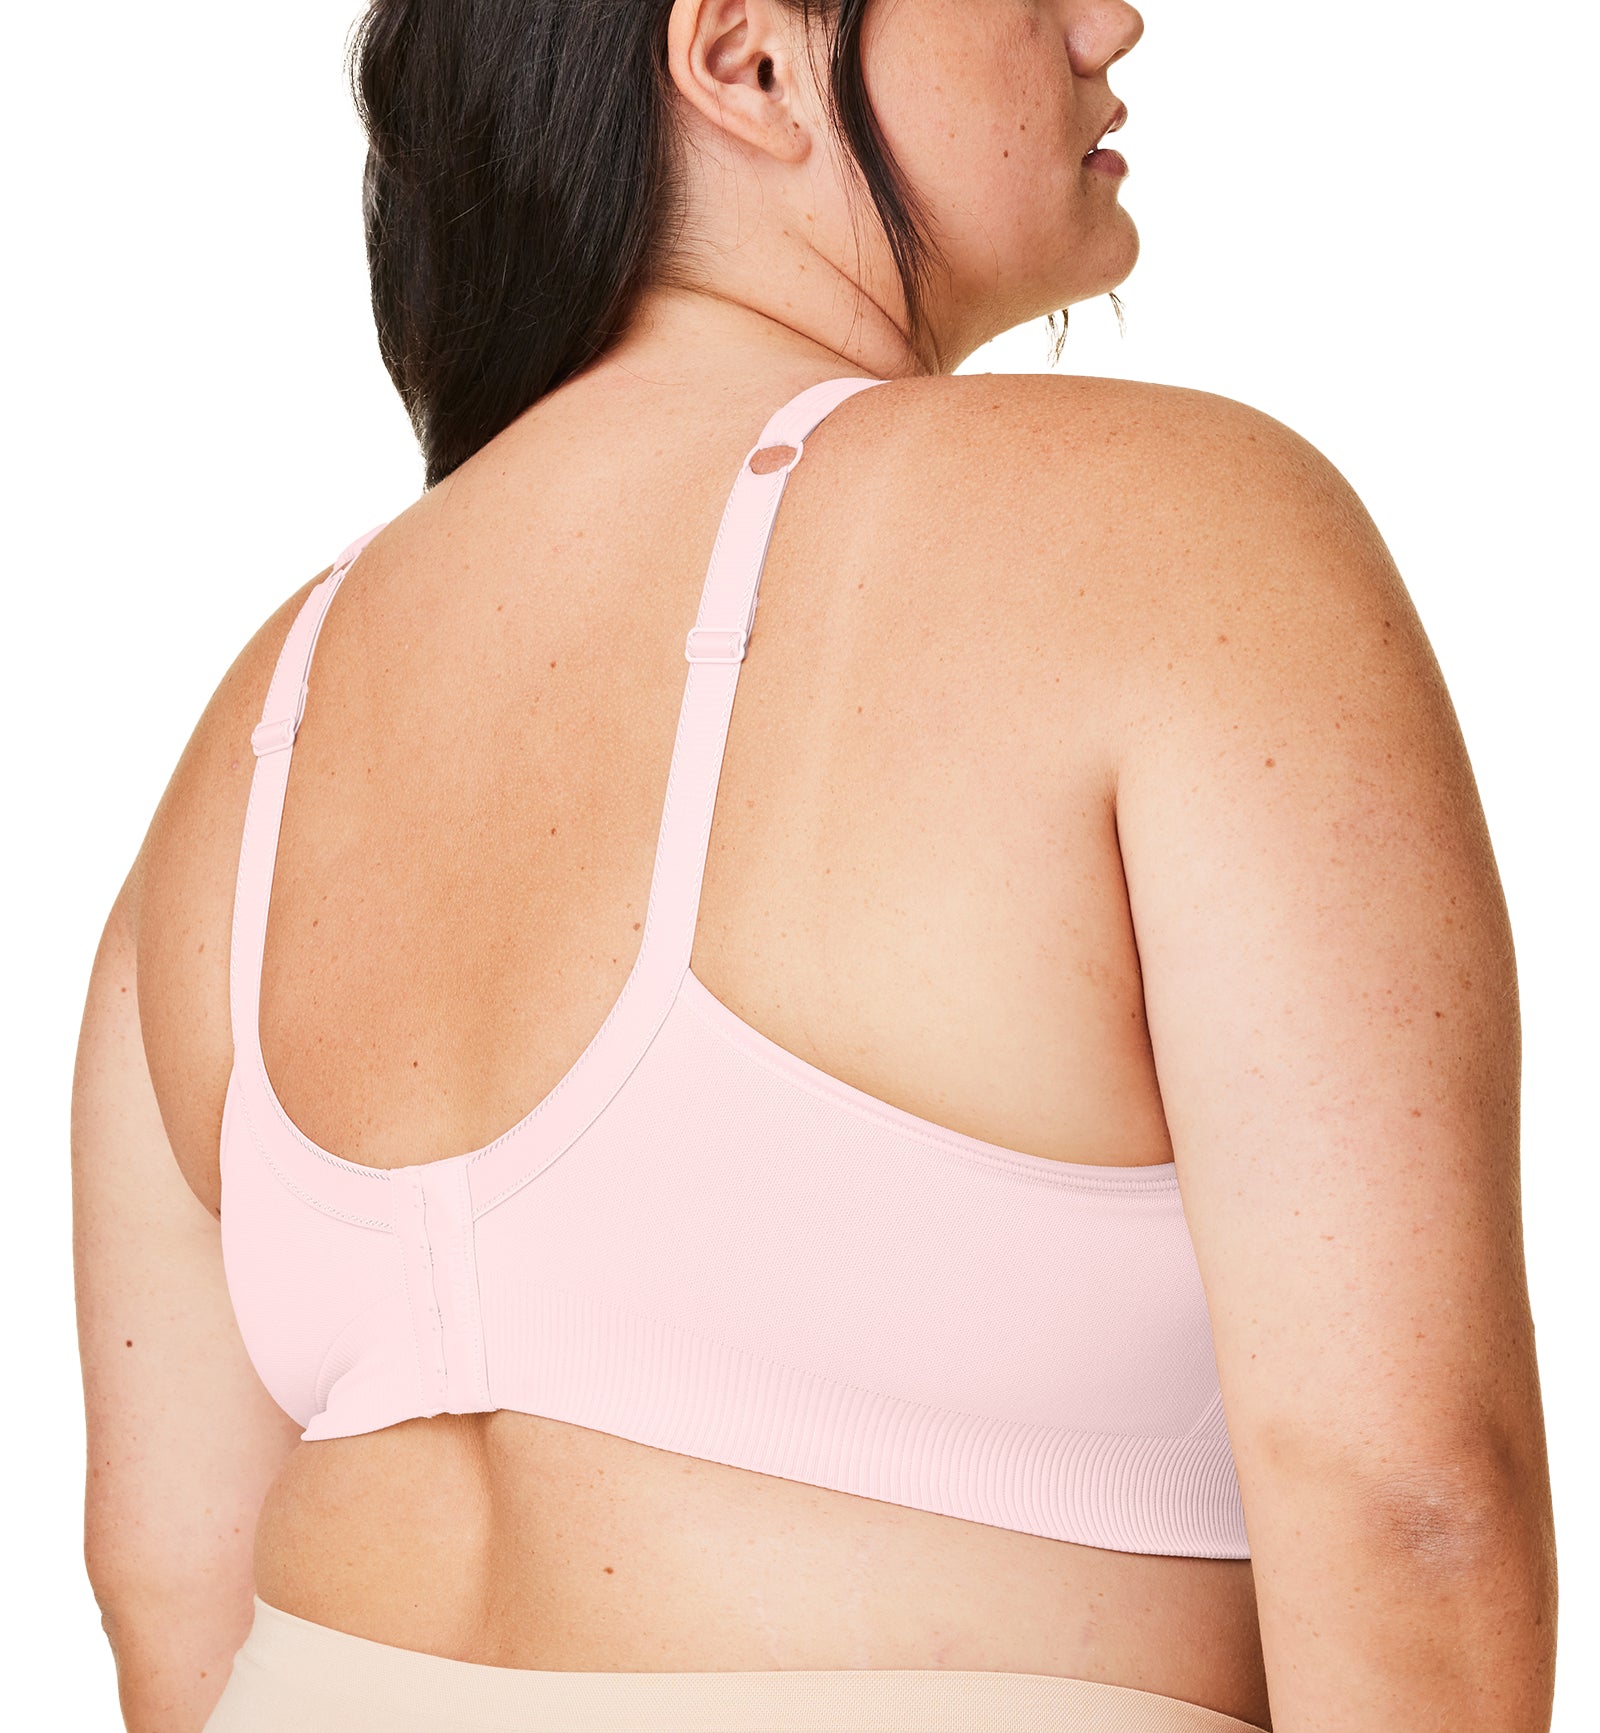 BRAVADO! DESIGNS Everyday Sculpt FULL CUP Wire-Free Bra (11011VFC),Small FC,Chalk Pink - Chalk Pink,Small-Full Cup